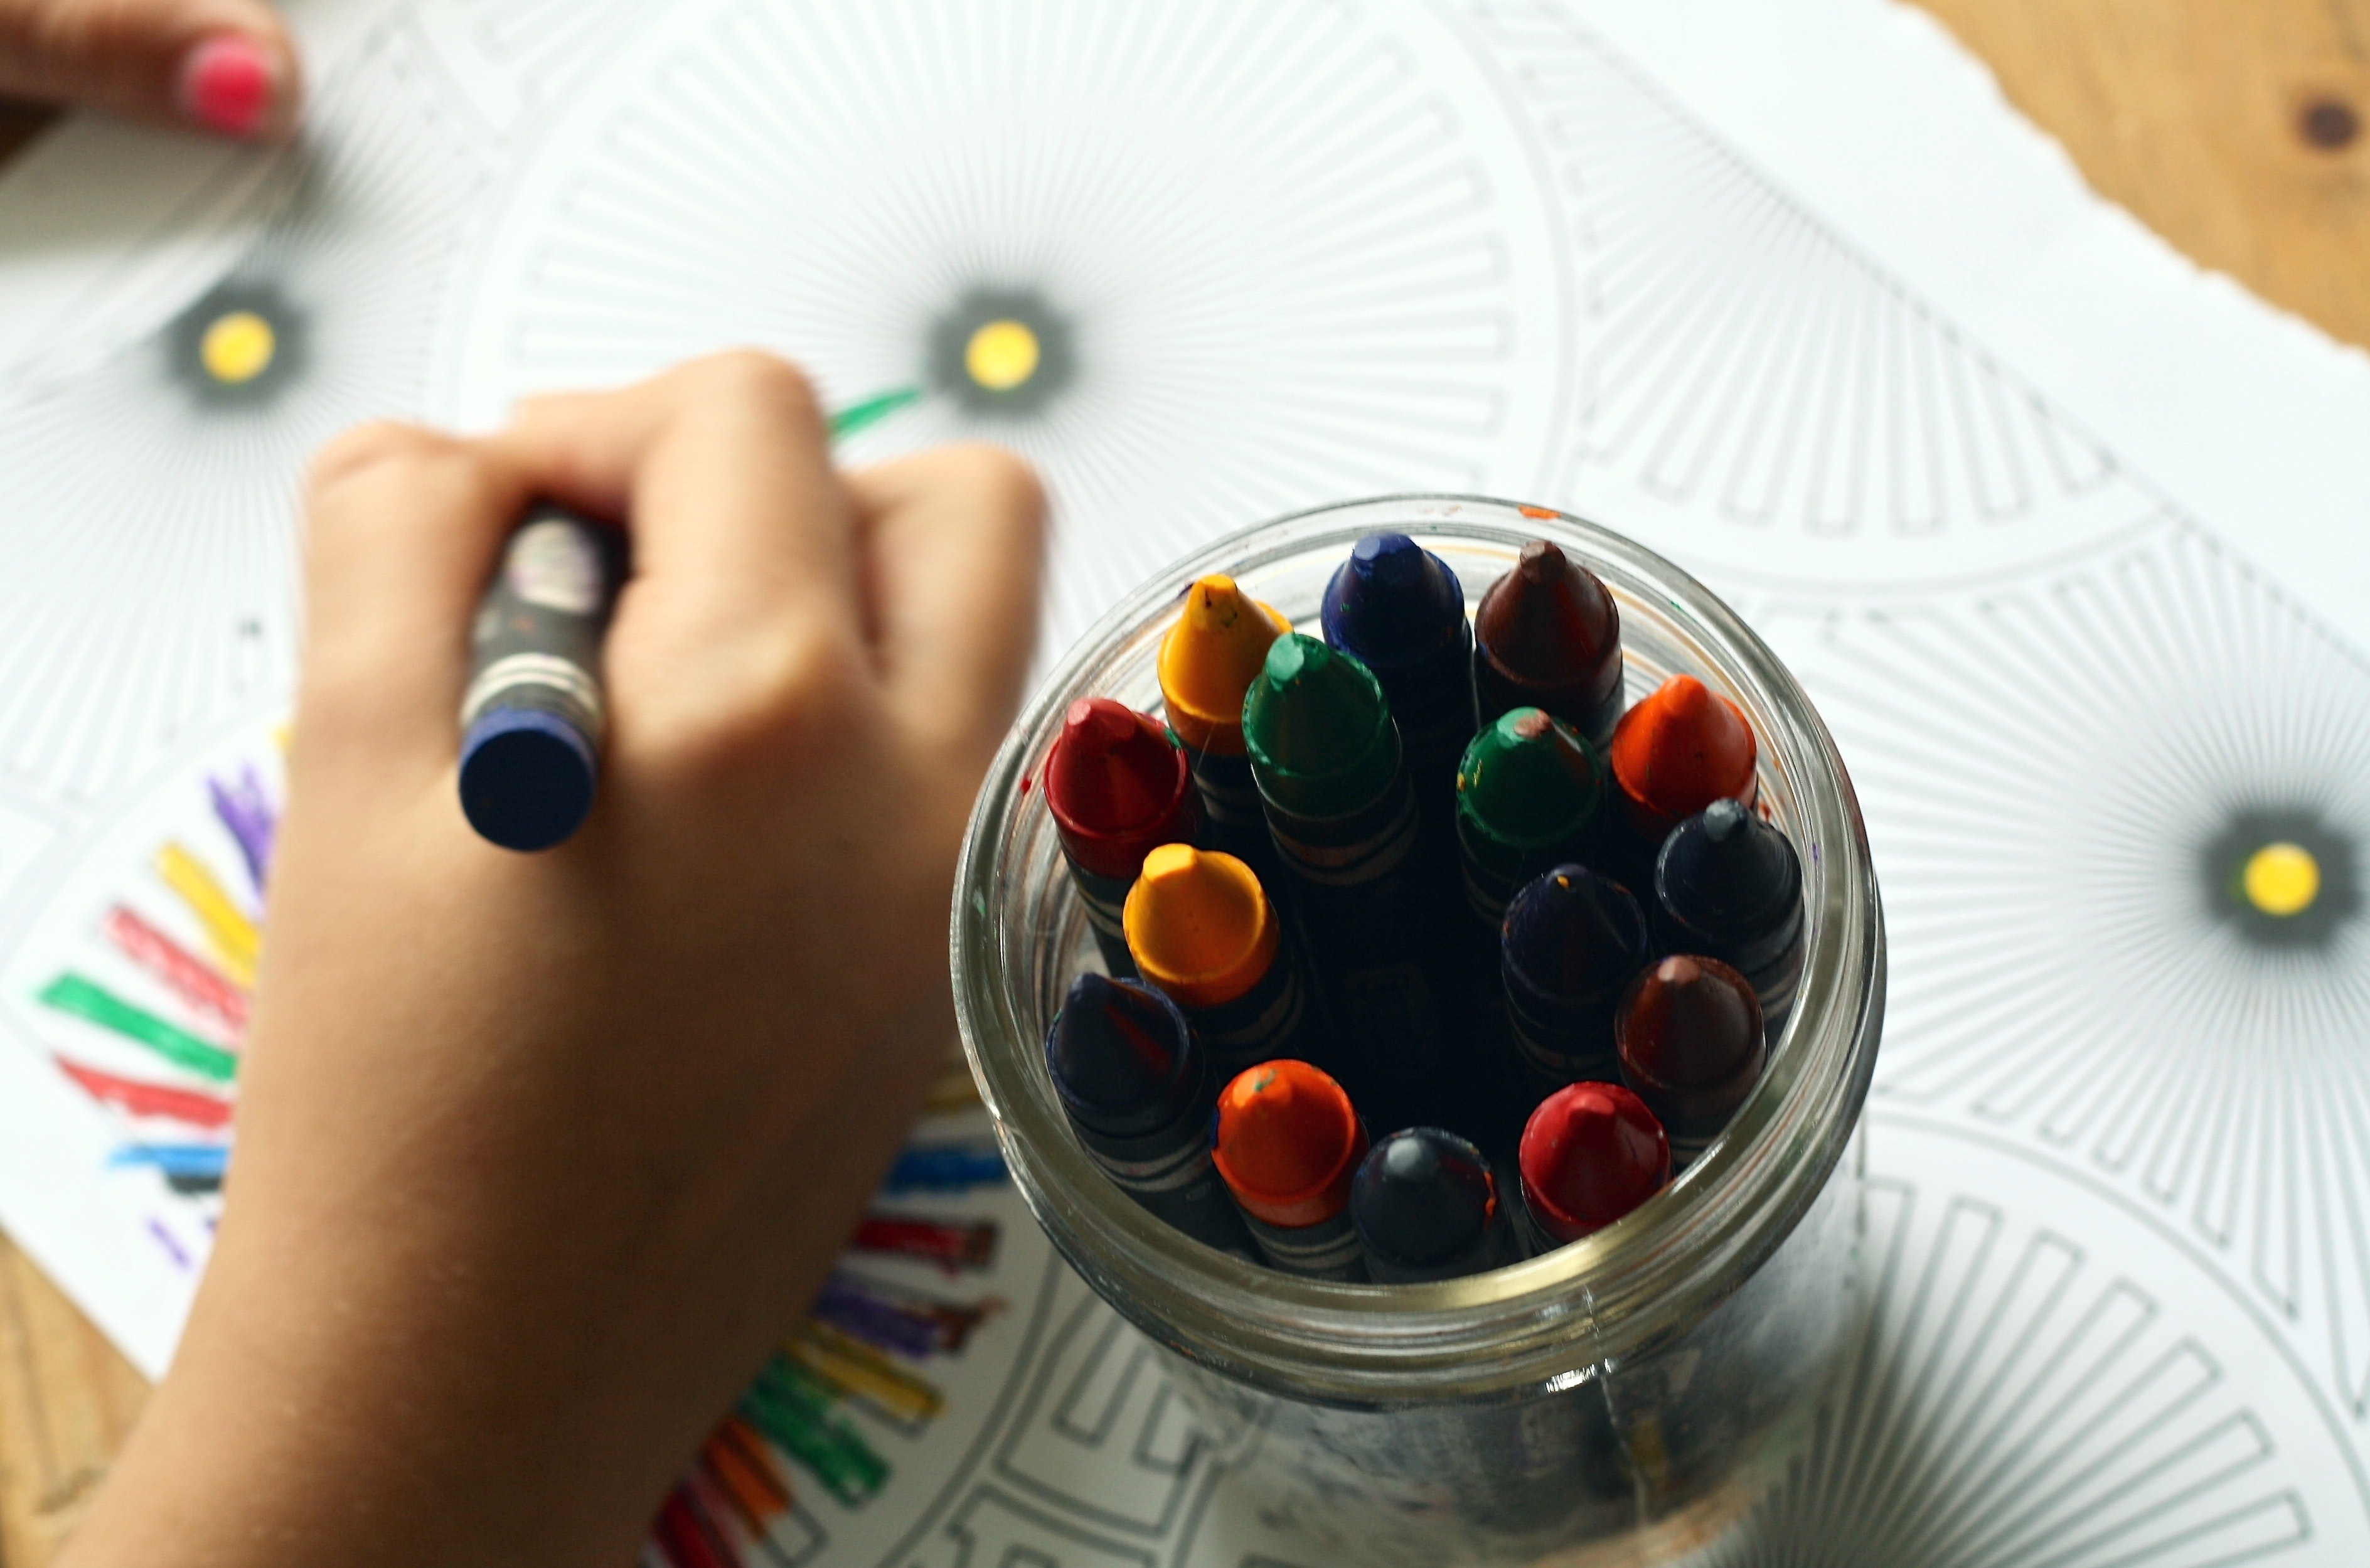 Child's hand coloring next to a jar of crayons